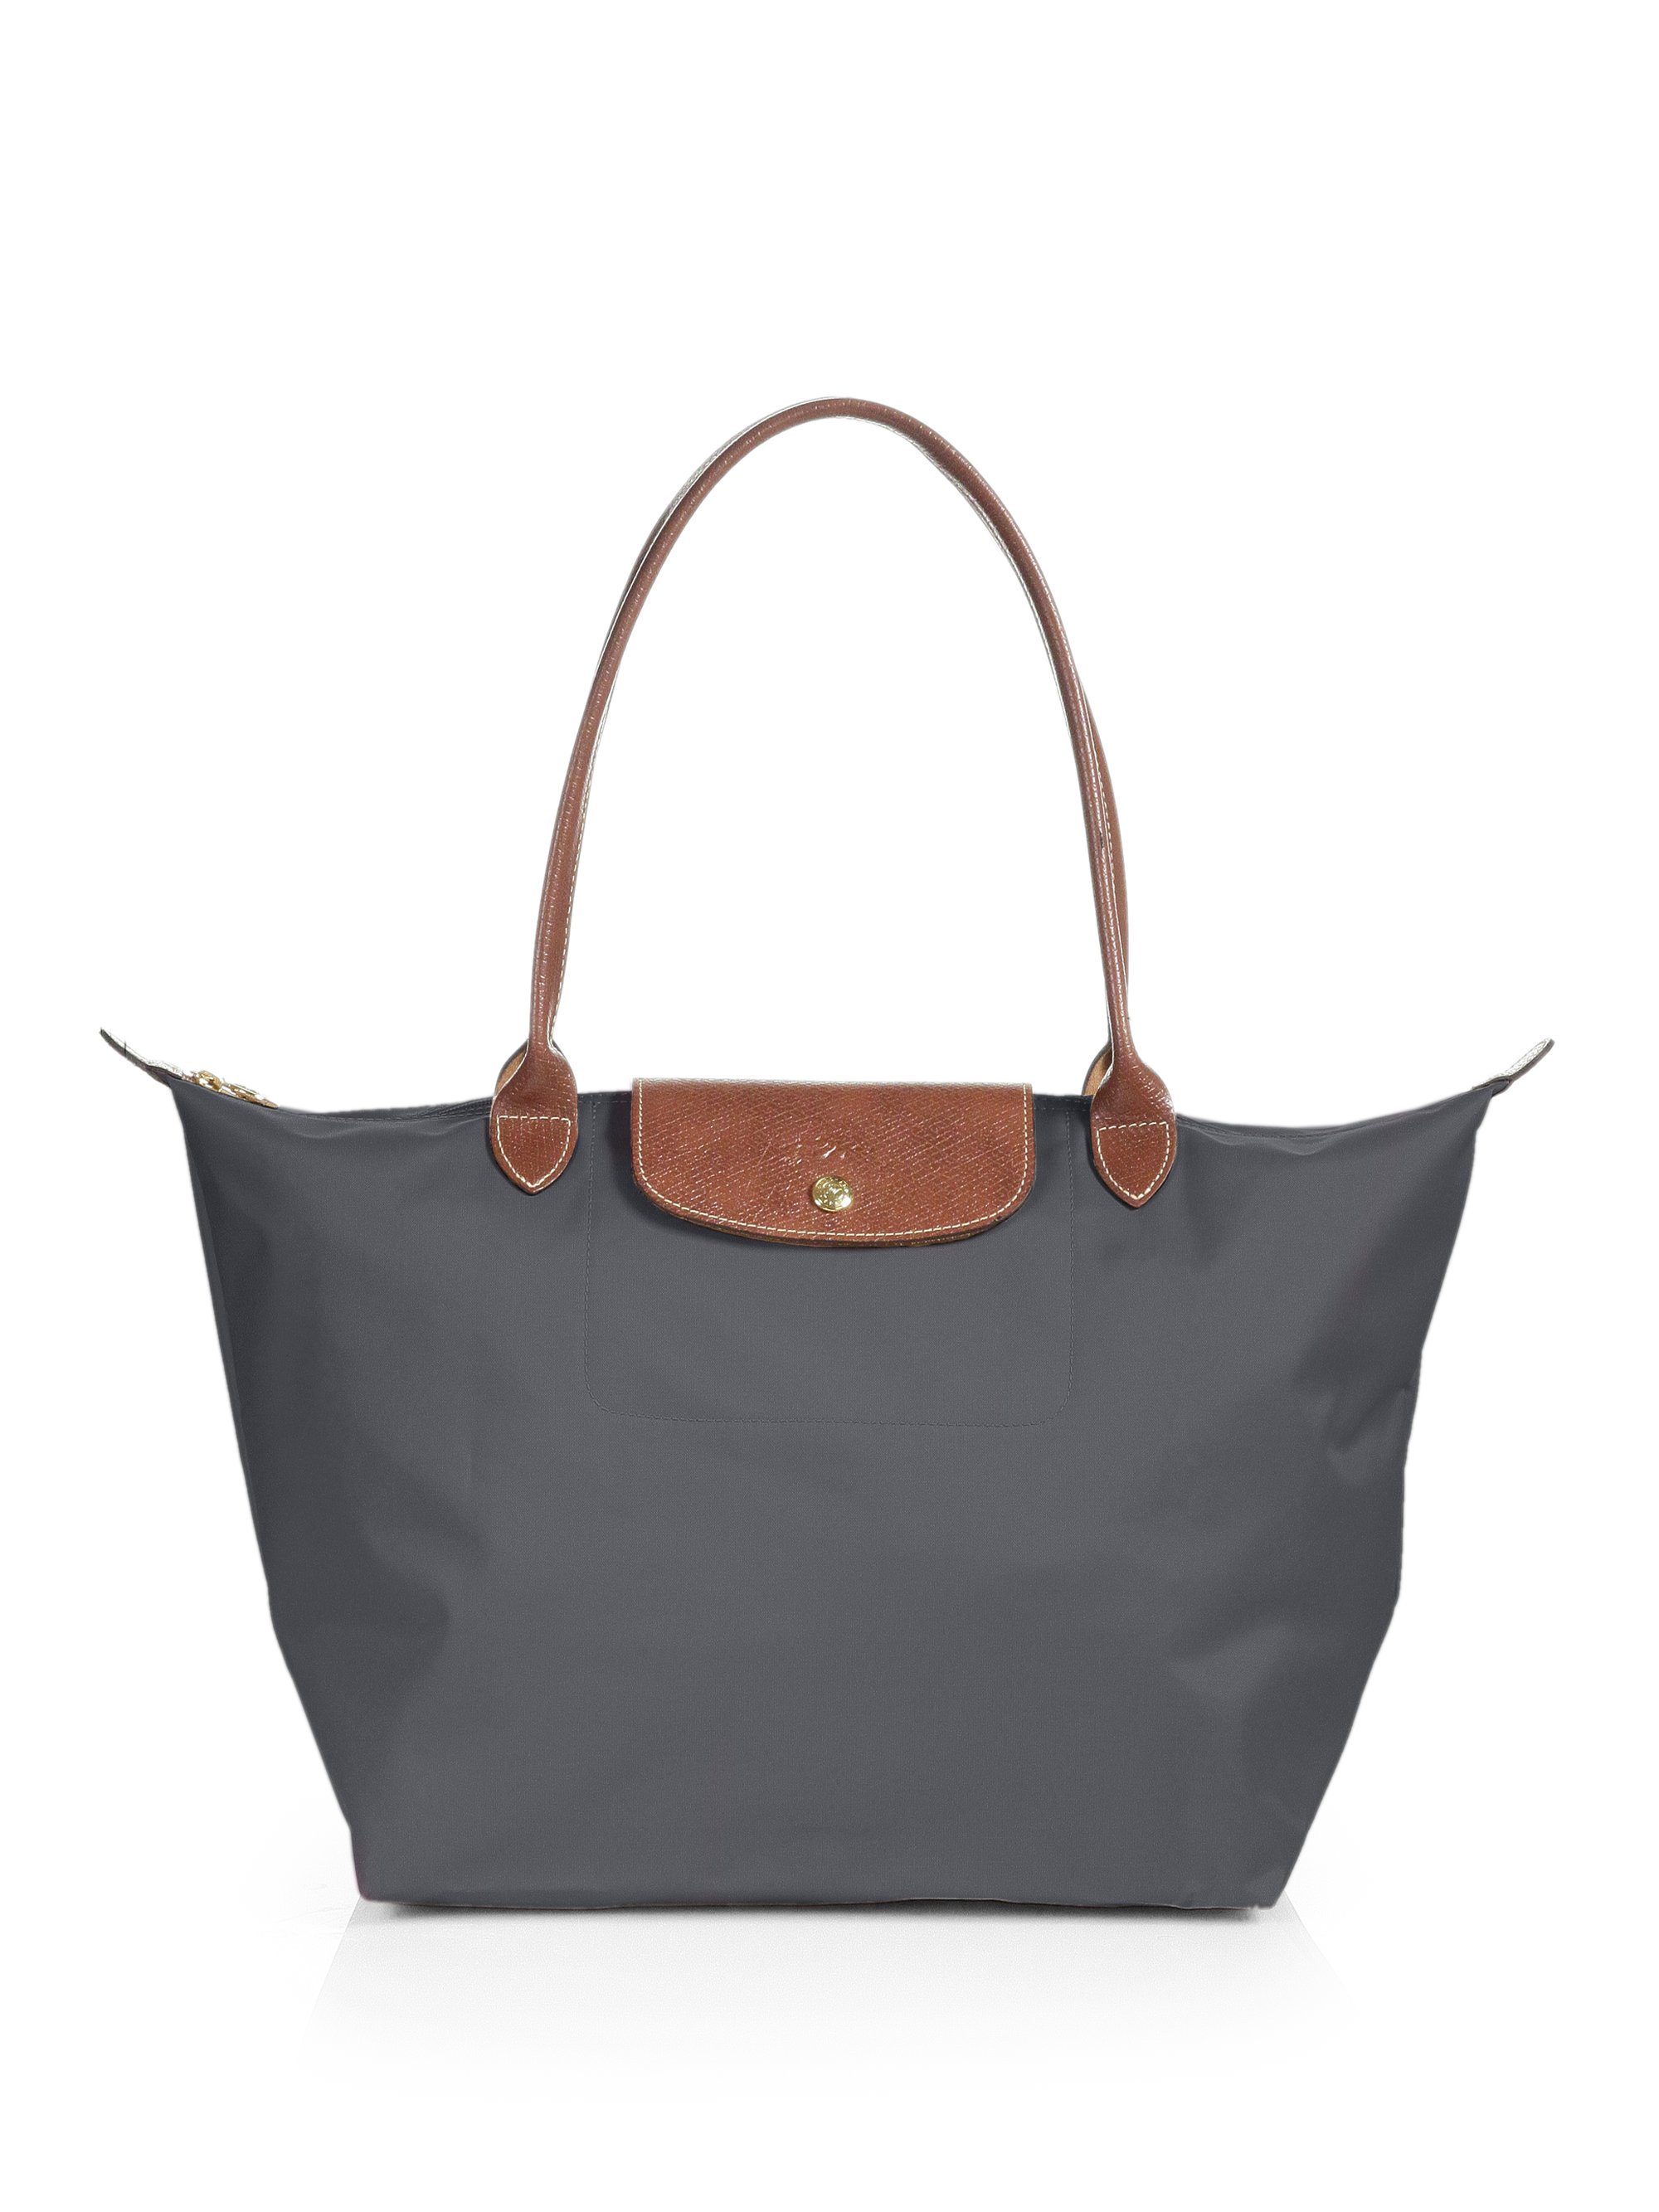 Lyst - Longchamp Le Pliage Large Shoulder Tote in Gray